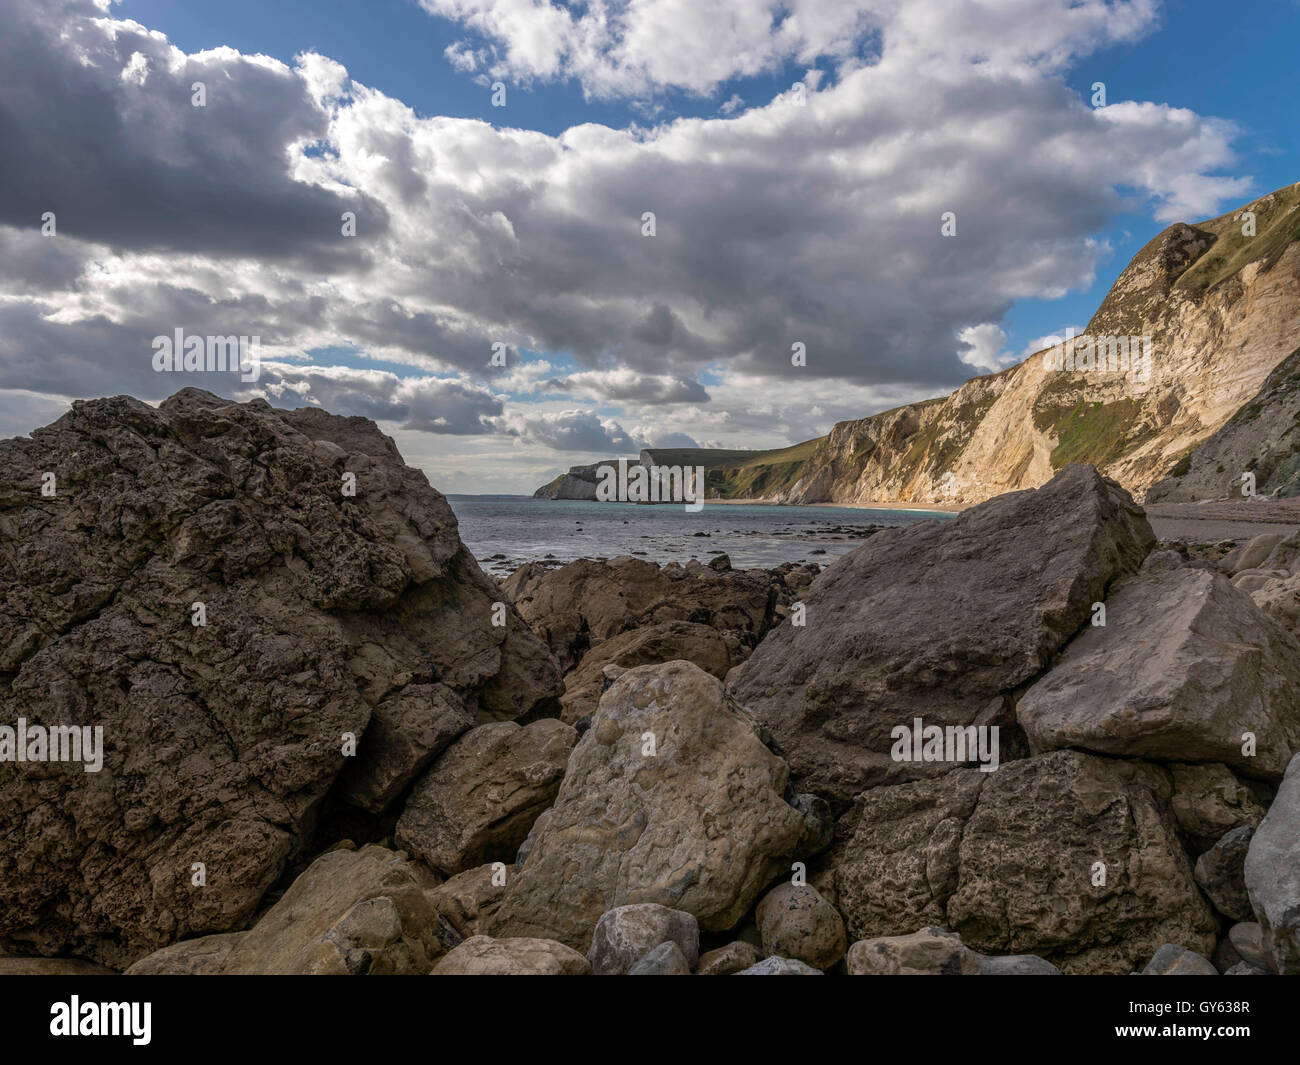 Landscape depicting the rocky shoreline of Man O'War beach on a fine summer day with Durdle Door headland in the background. Stock Photo